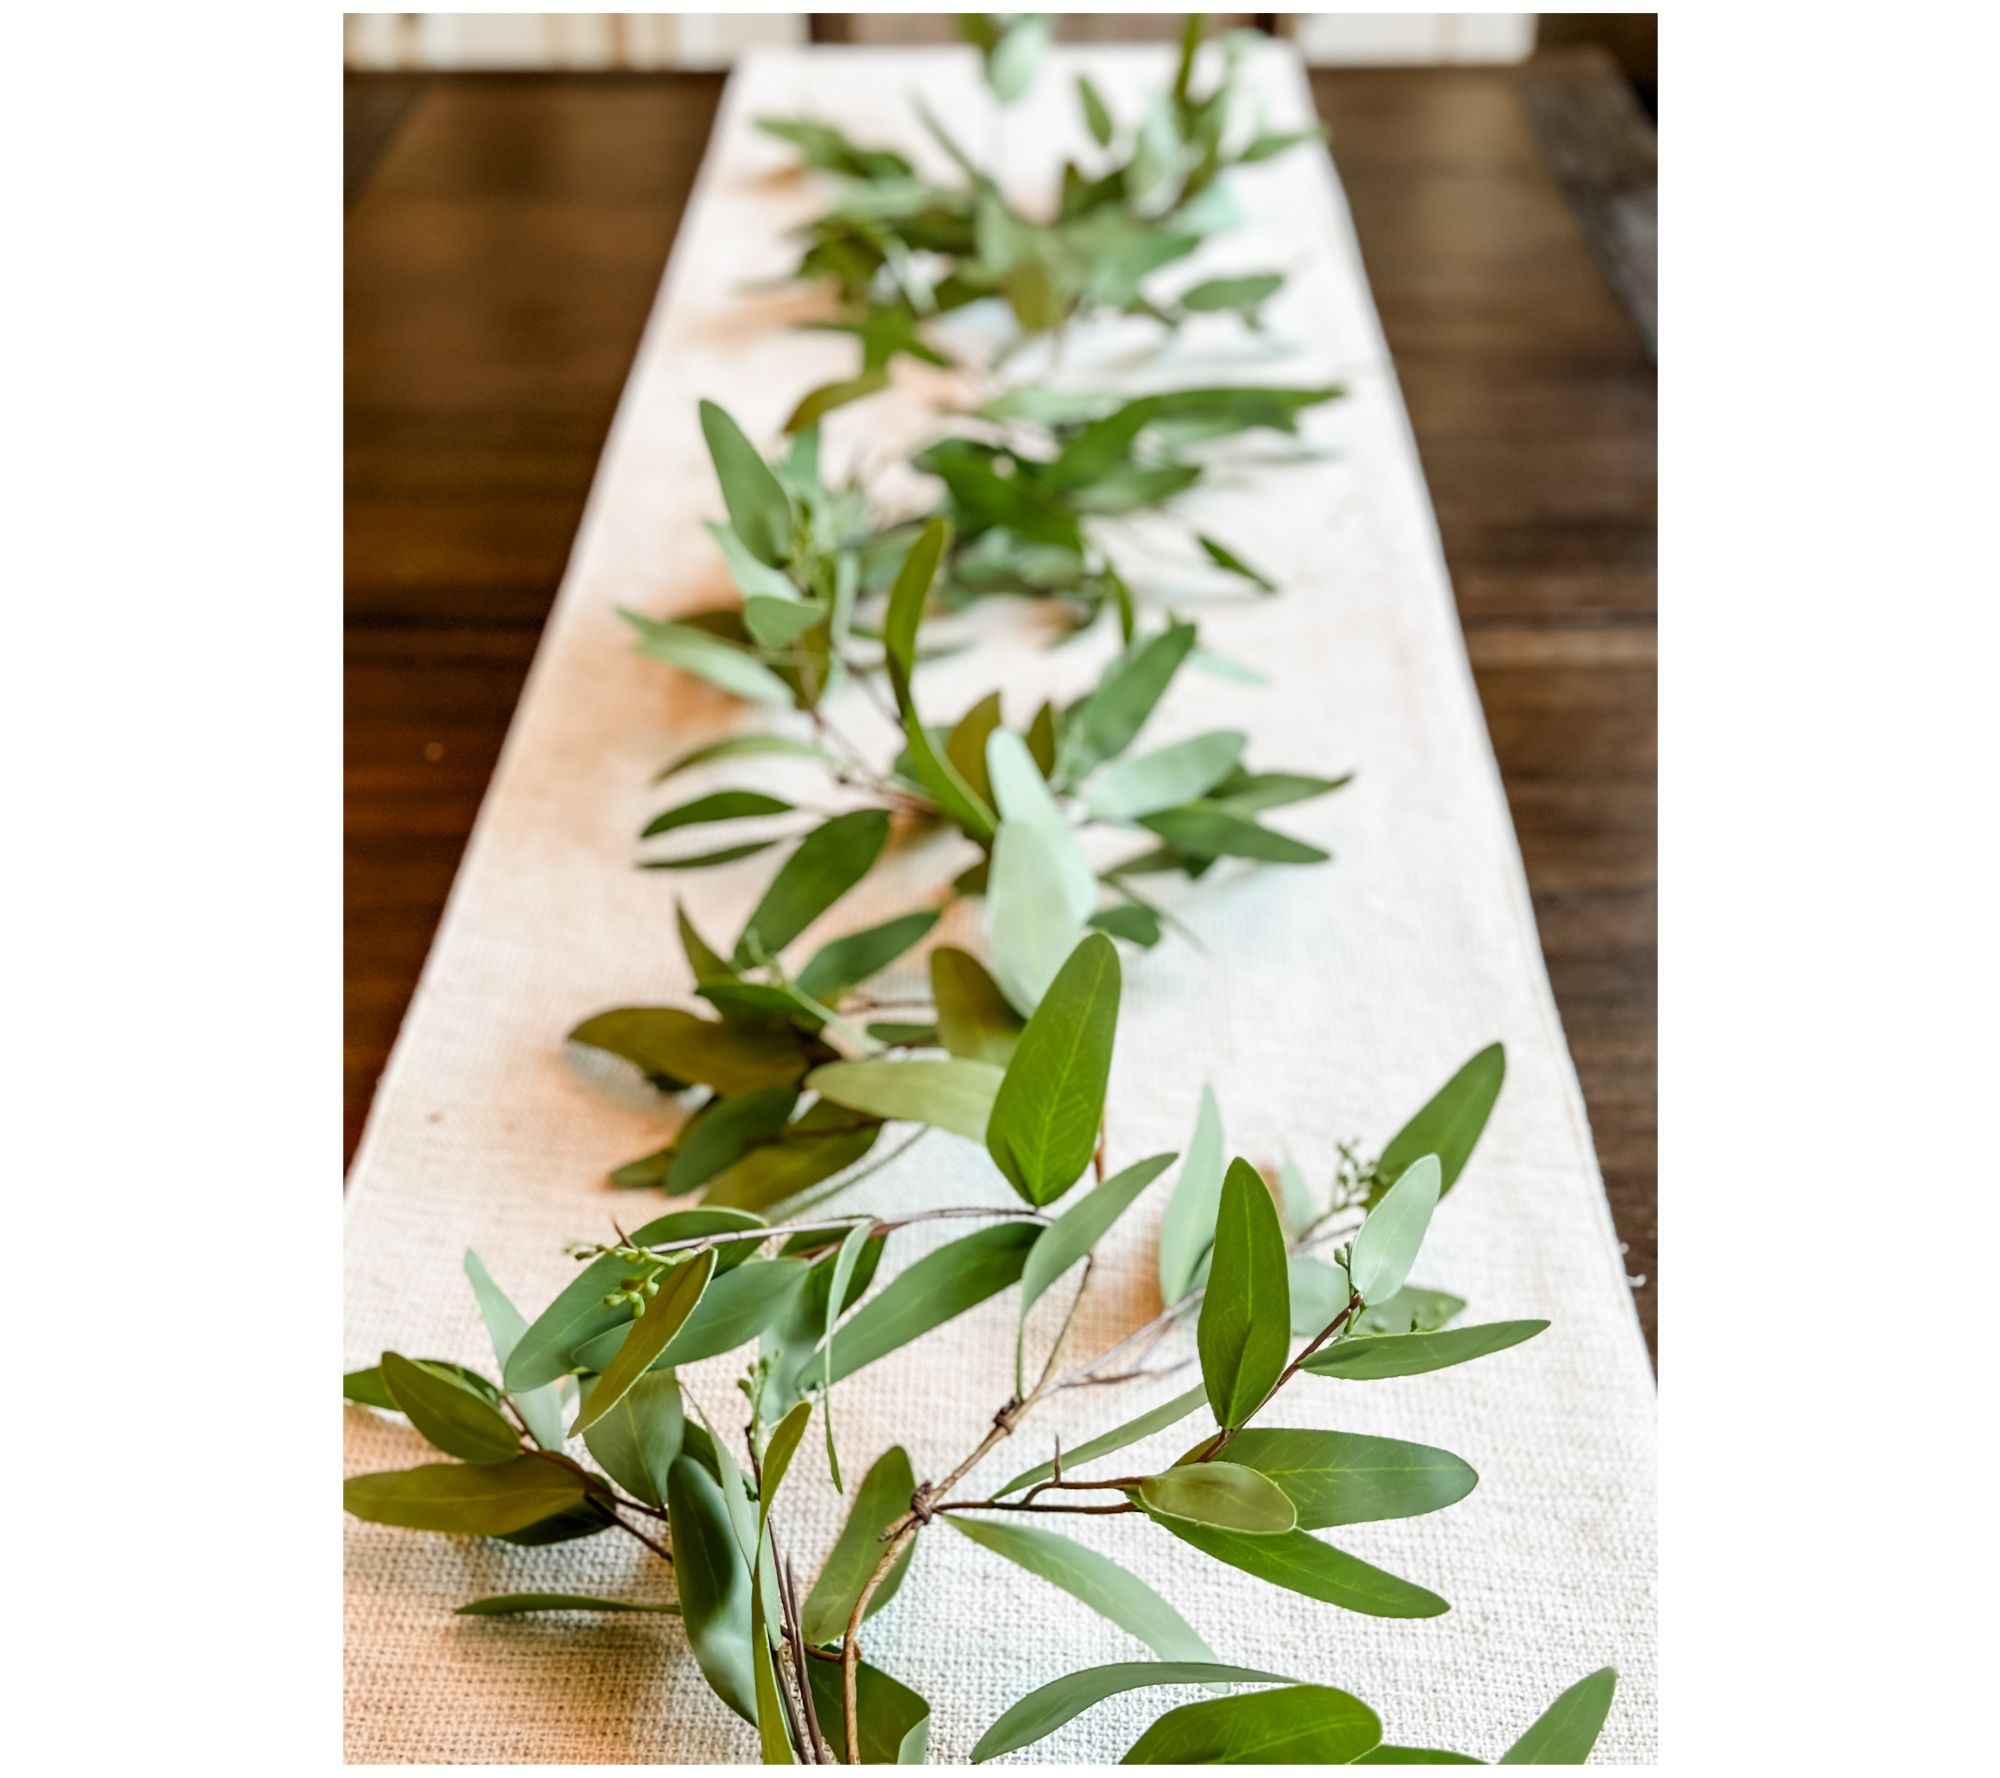 Simply Stunning 5' Real Touch Eucalyptus Garland by Janine Graff 